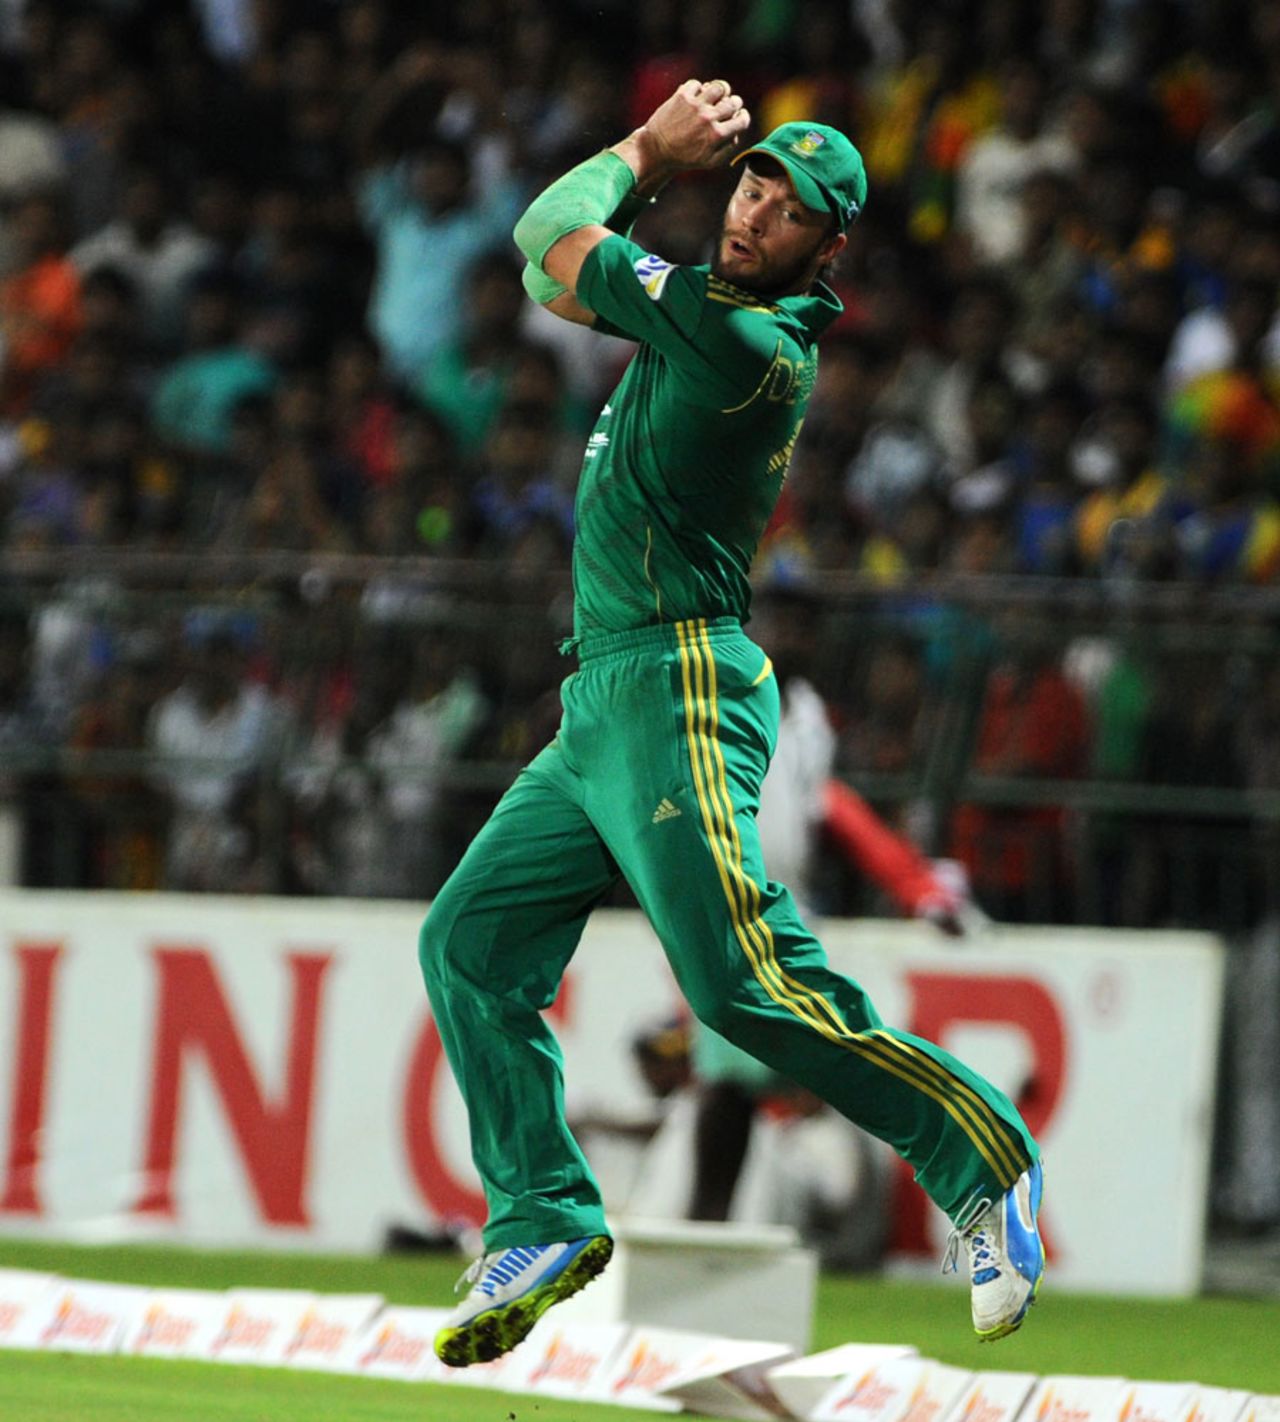 AB de Villiers takes a catch at the boundary, Sri Lanka v South Africa, 1st T20, Colombo, August 2, 2013